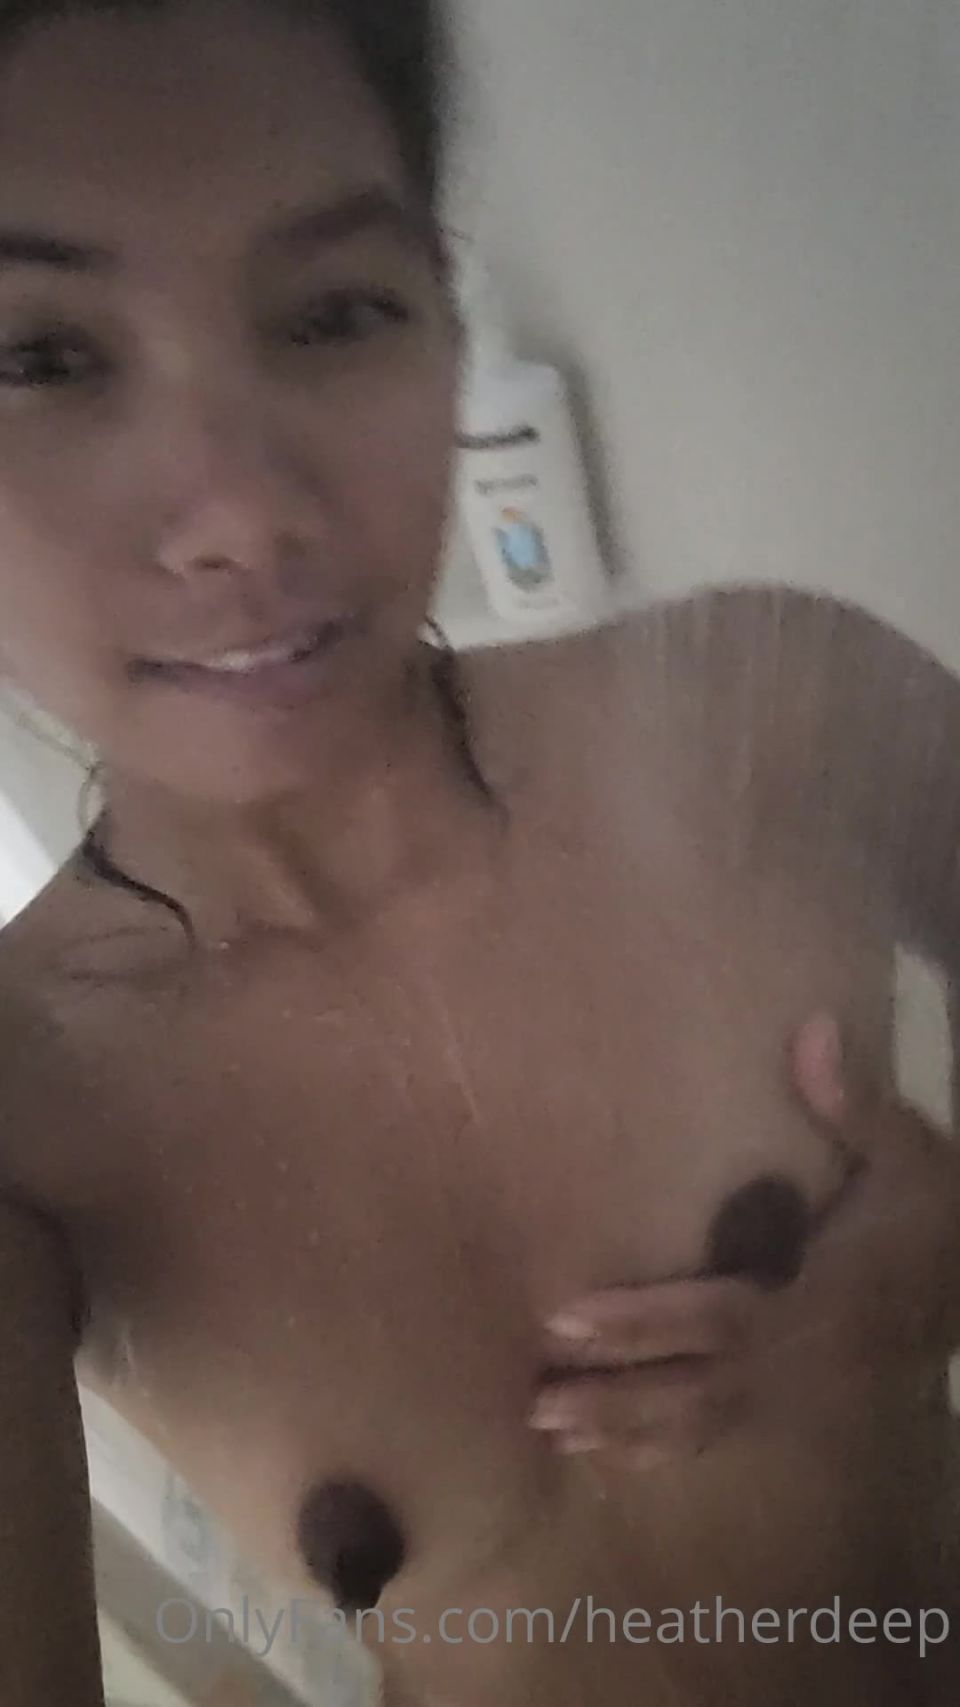 Onlyfans - heatherdeep - I want to get fuck in shower nbsp come behind me daddy  shower naked fu - 24-10-2021